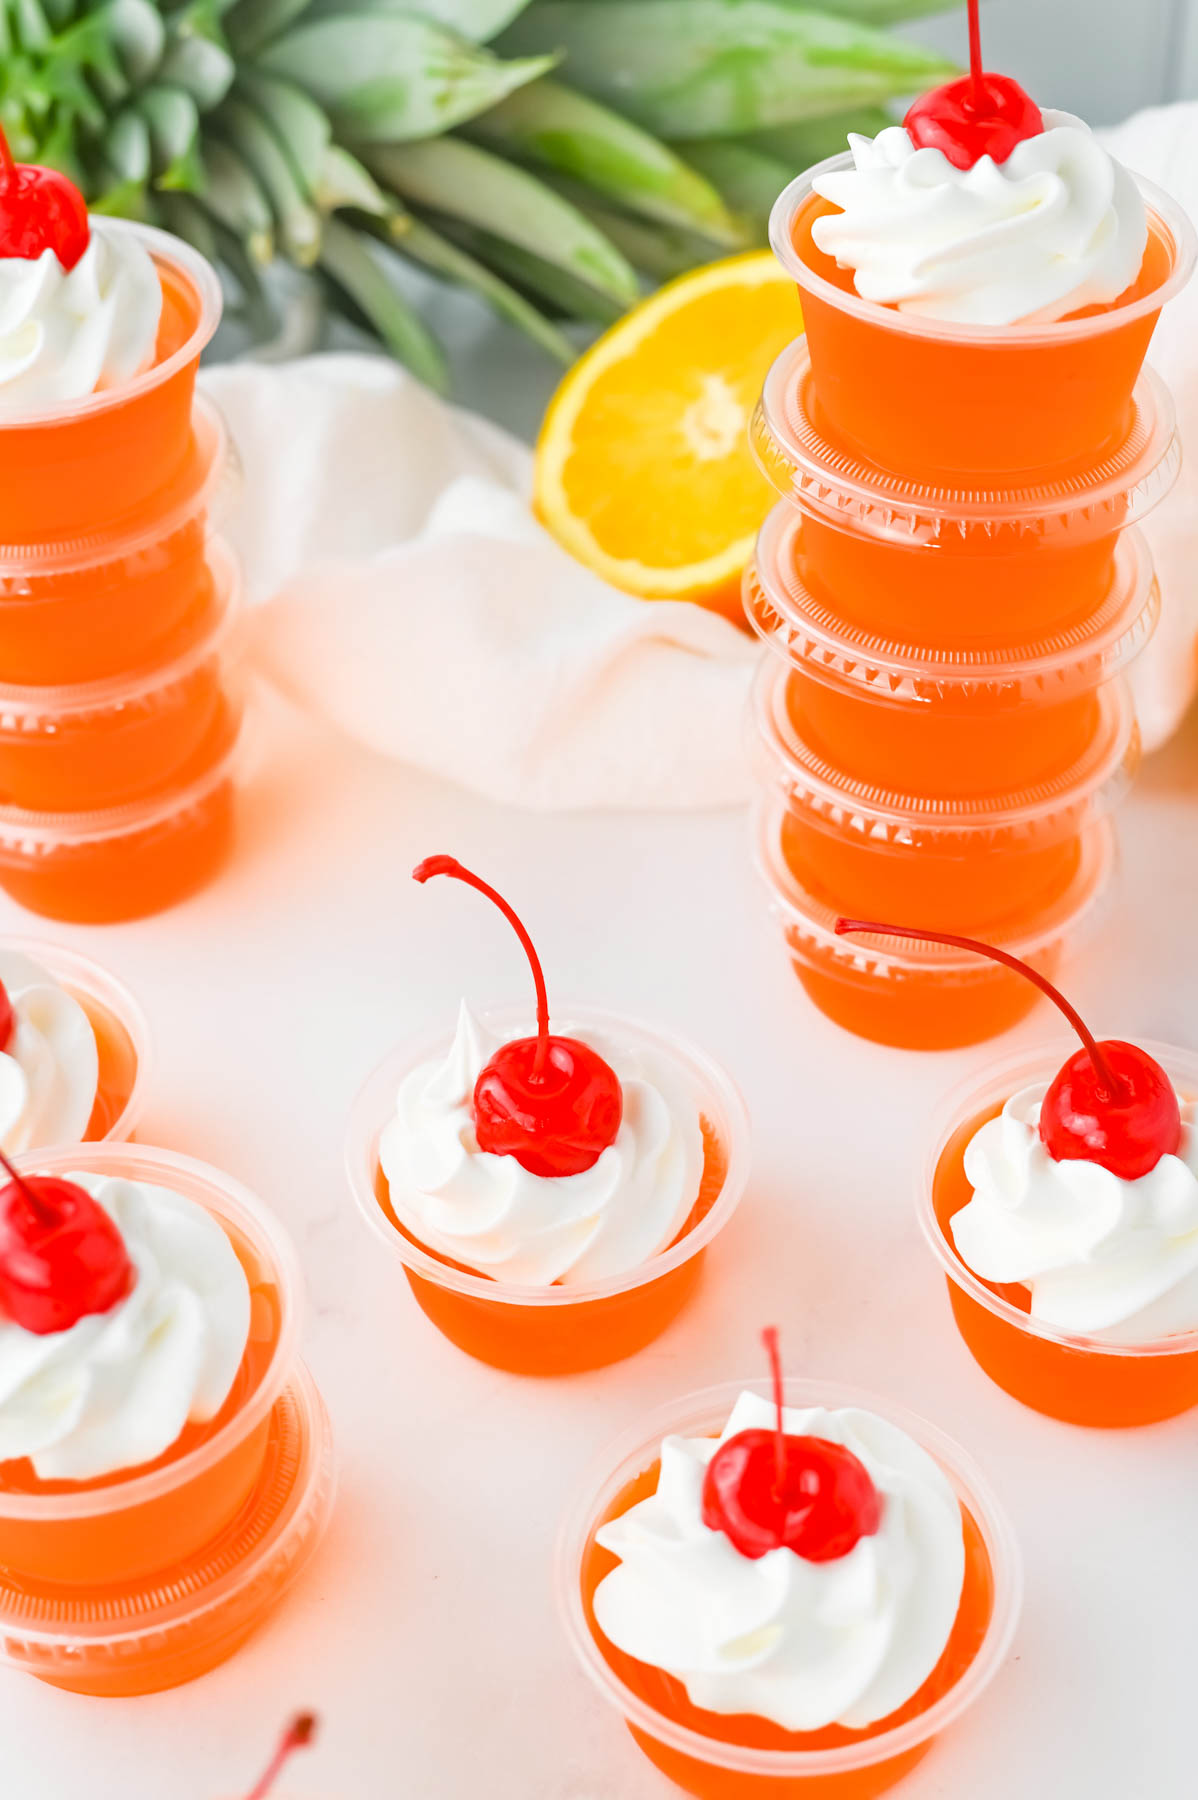 Bahama mama jello shots with whipped cream and cherry on top.